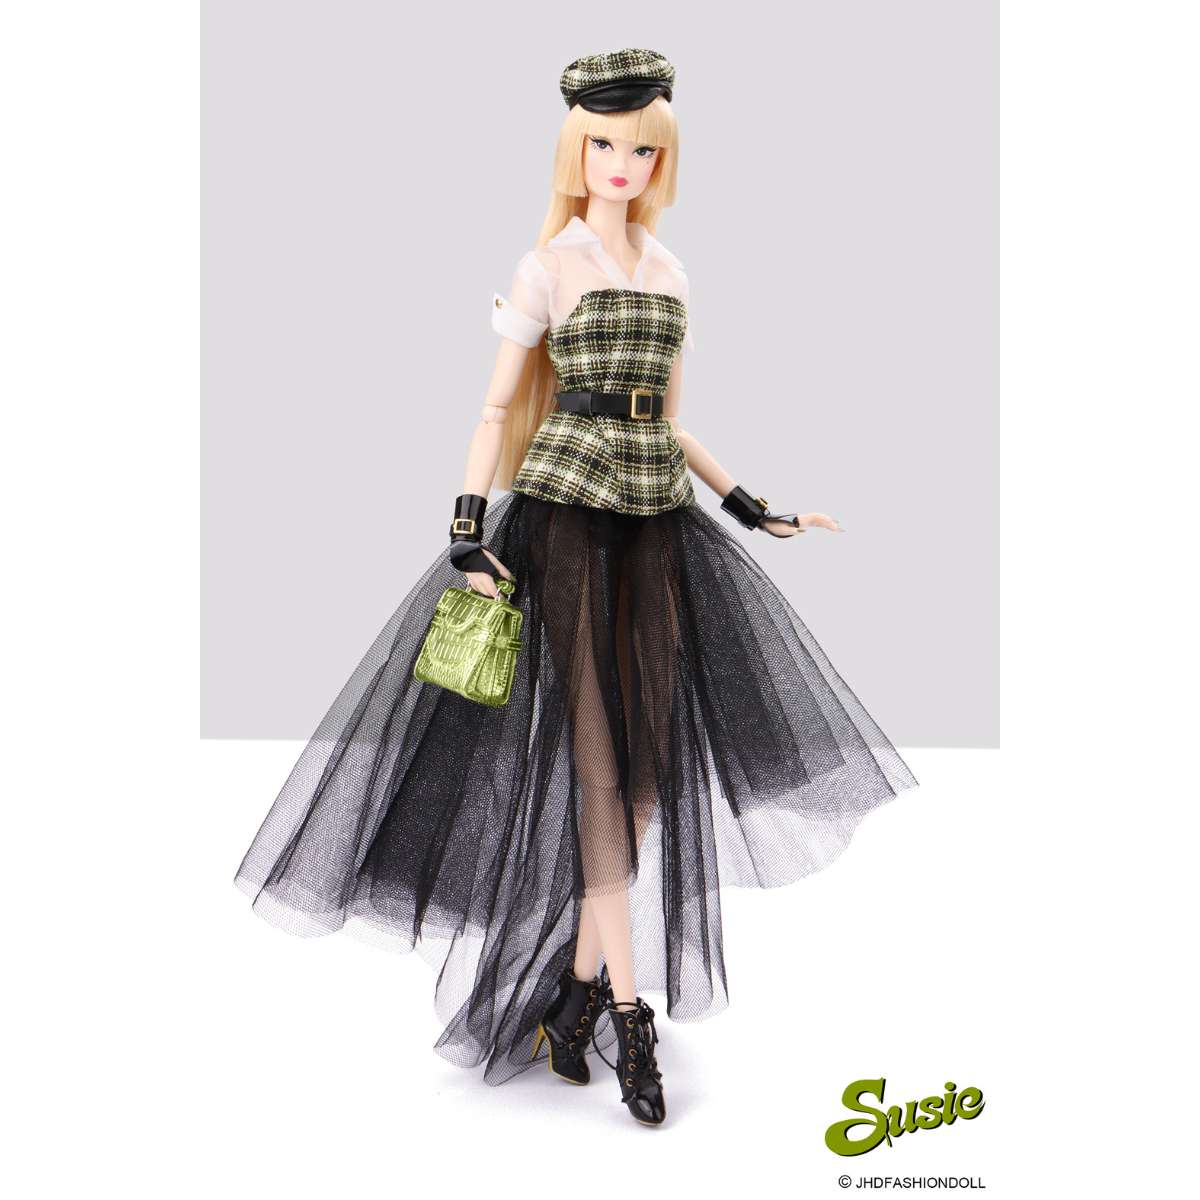 Susie: FASHION NIGHT OUT Exclusive Doll by JHDFASHIONDOLL - Simon's Collectibles